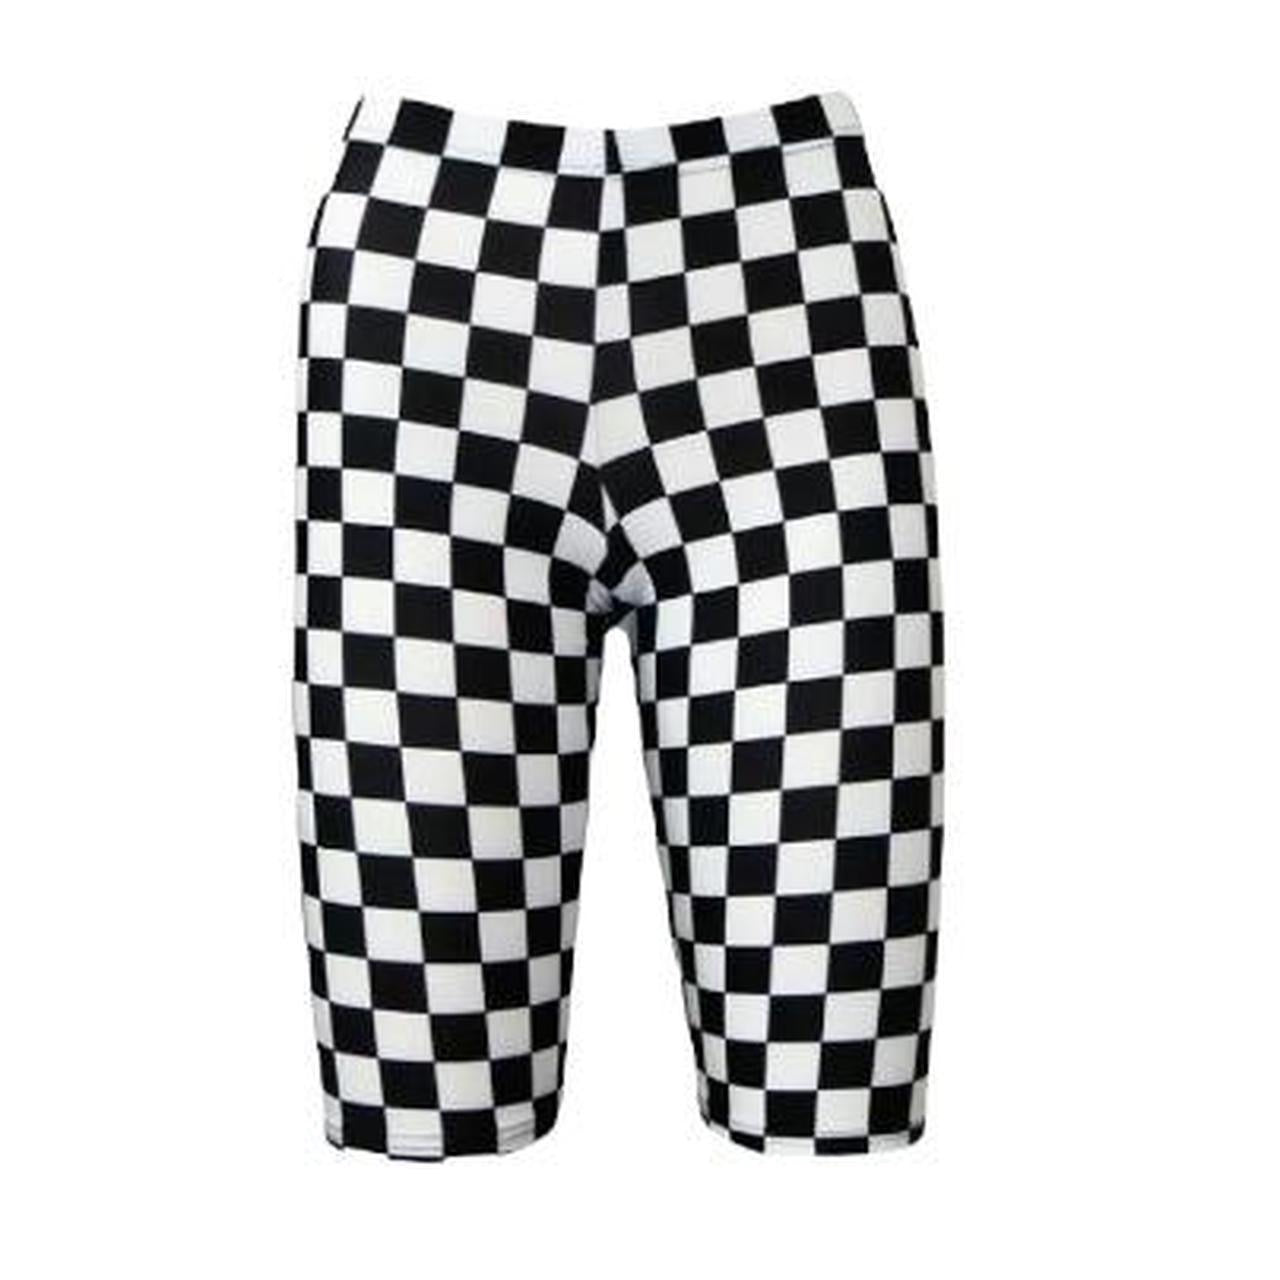 Black and White Checkerboard Shorts Crop top Co-Ord Festival Set